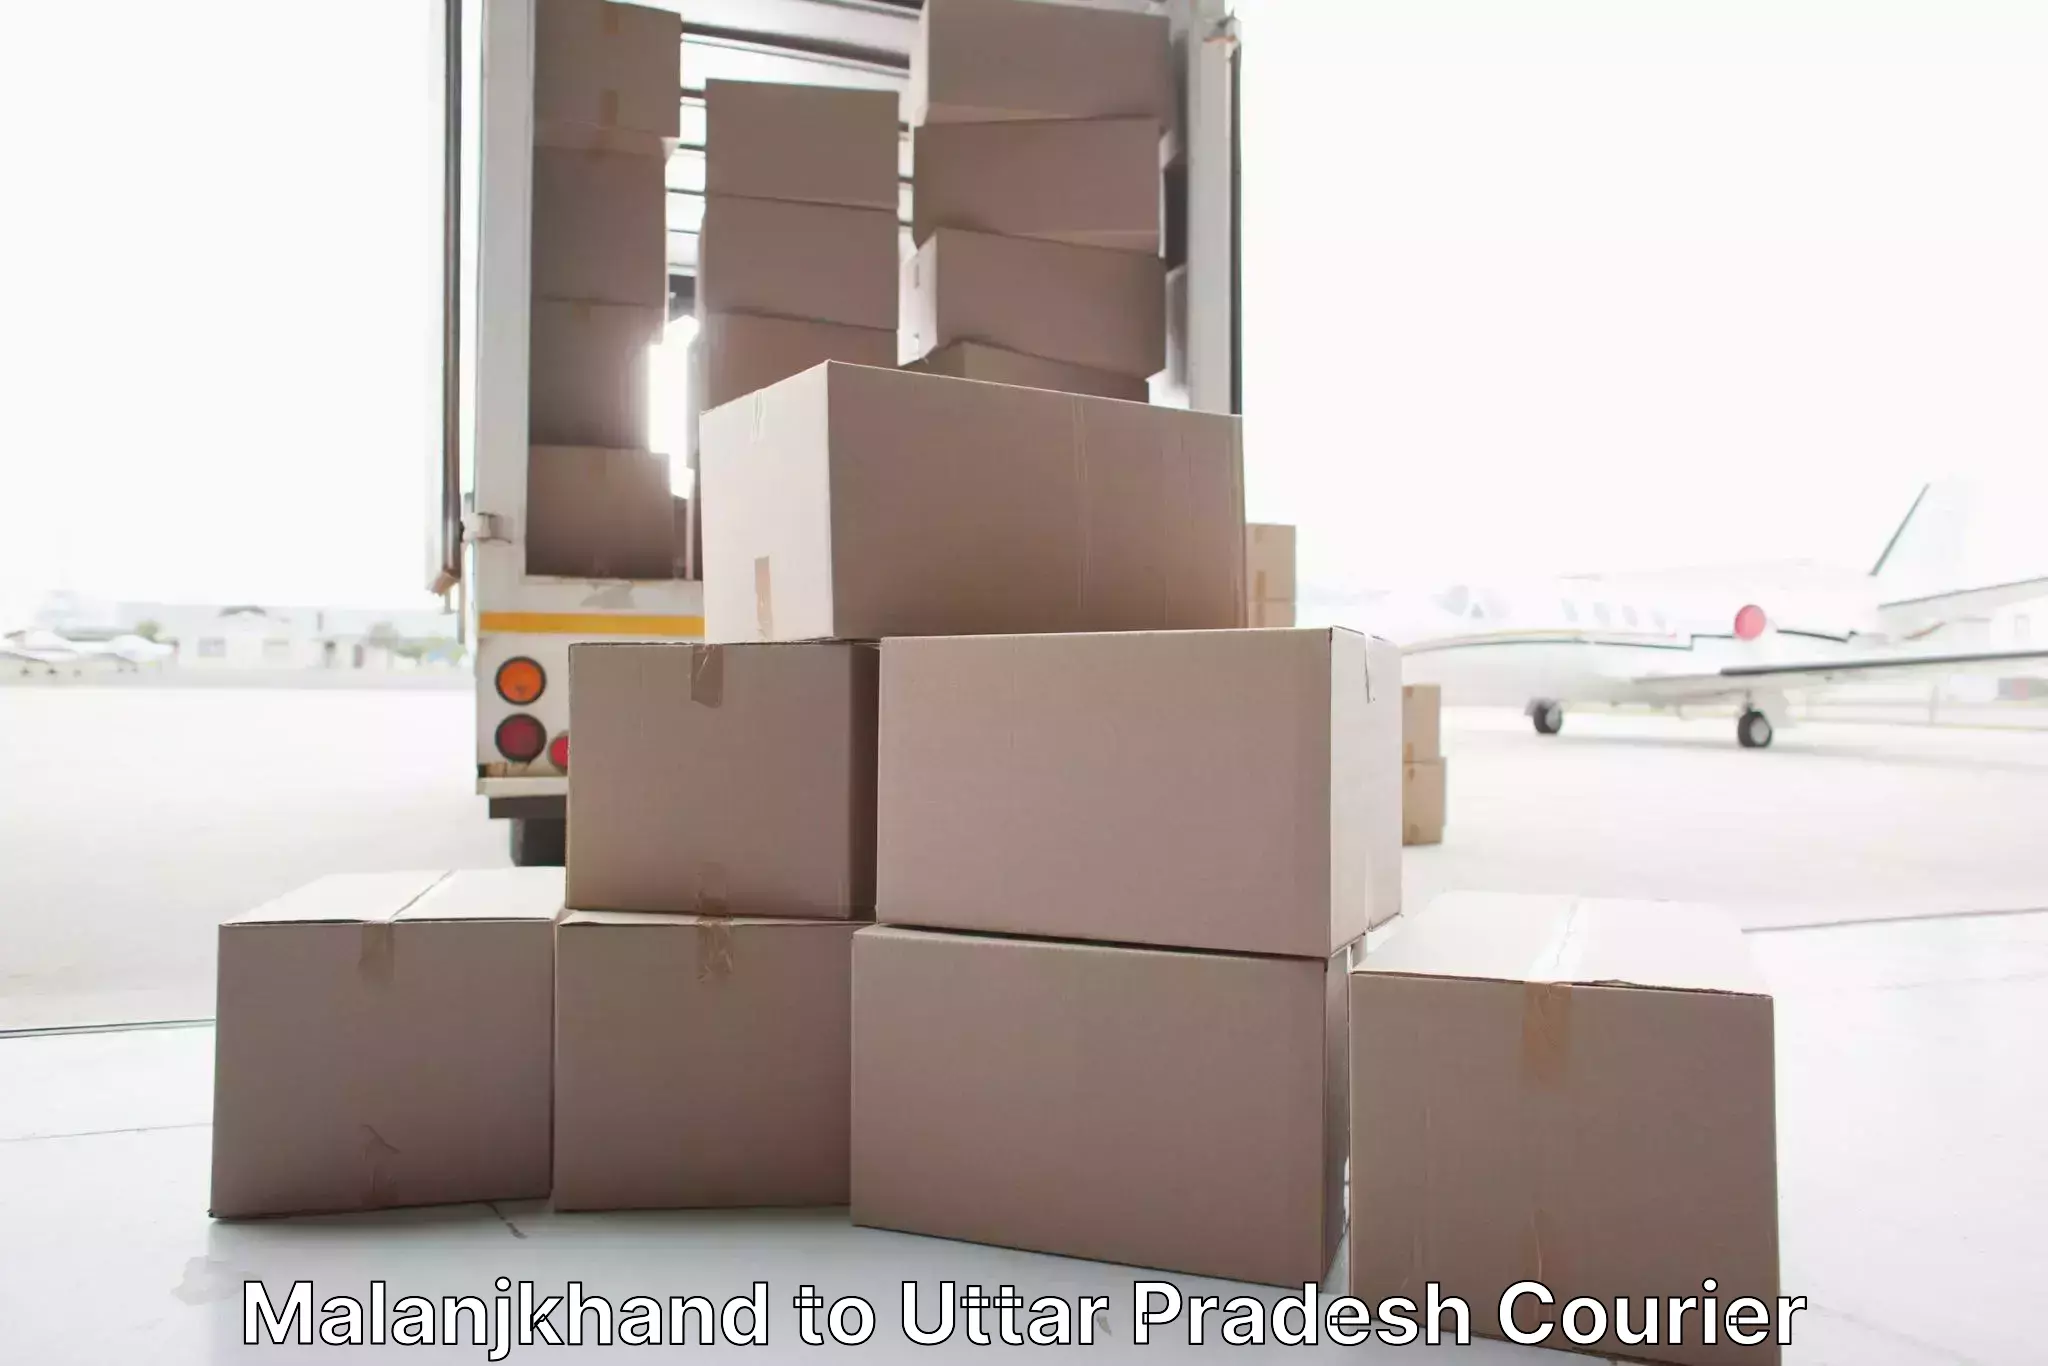 Furniture delivery service Malanjkhand to Kanth